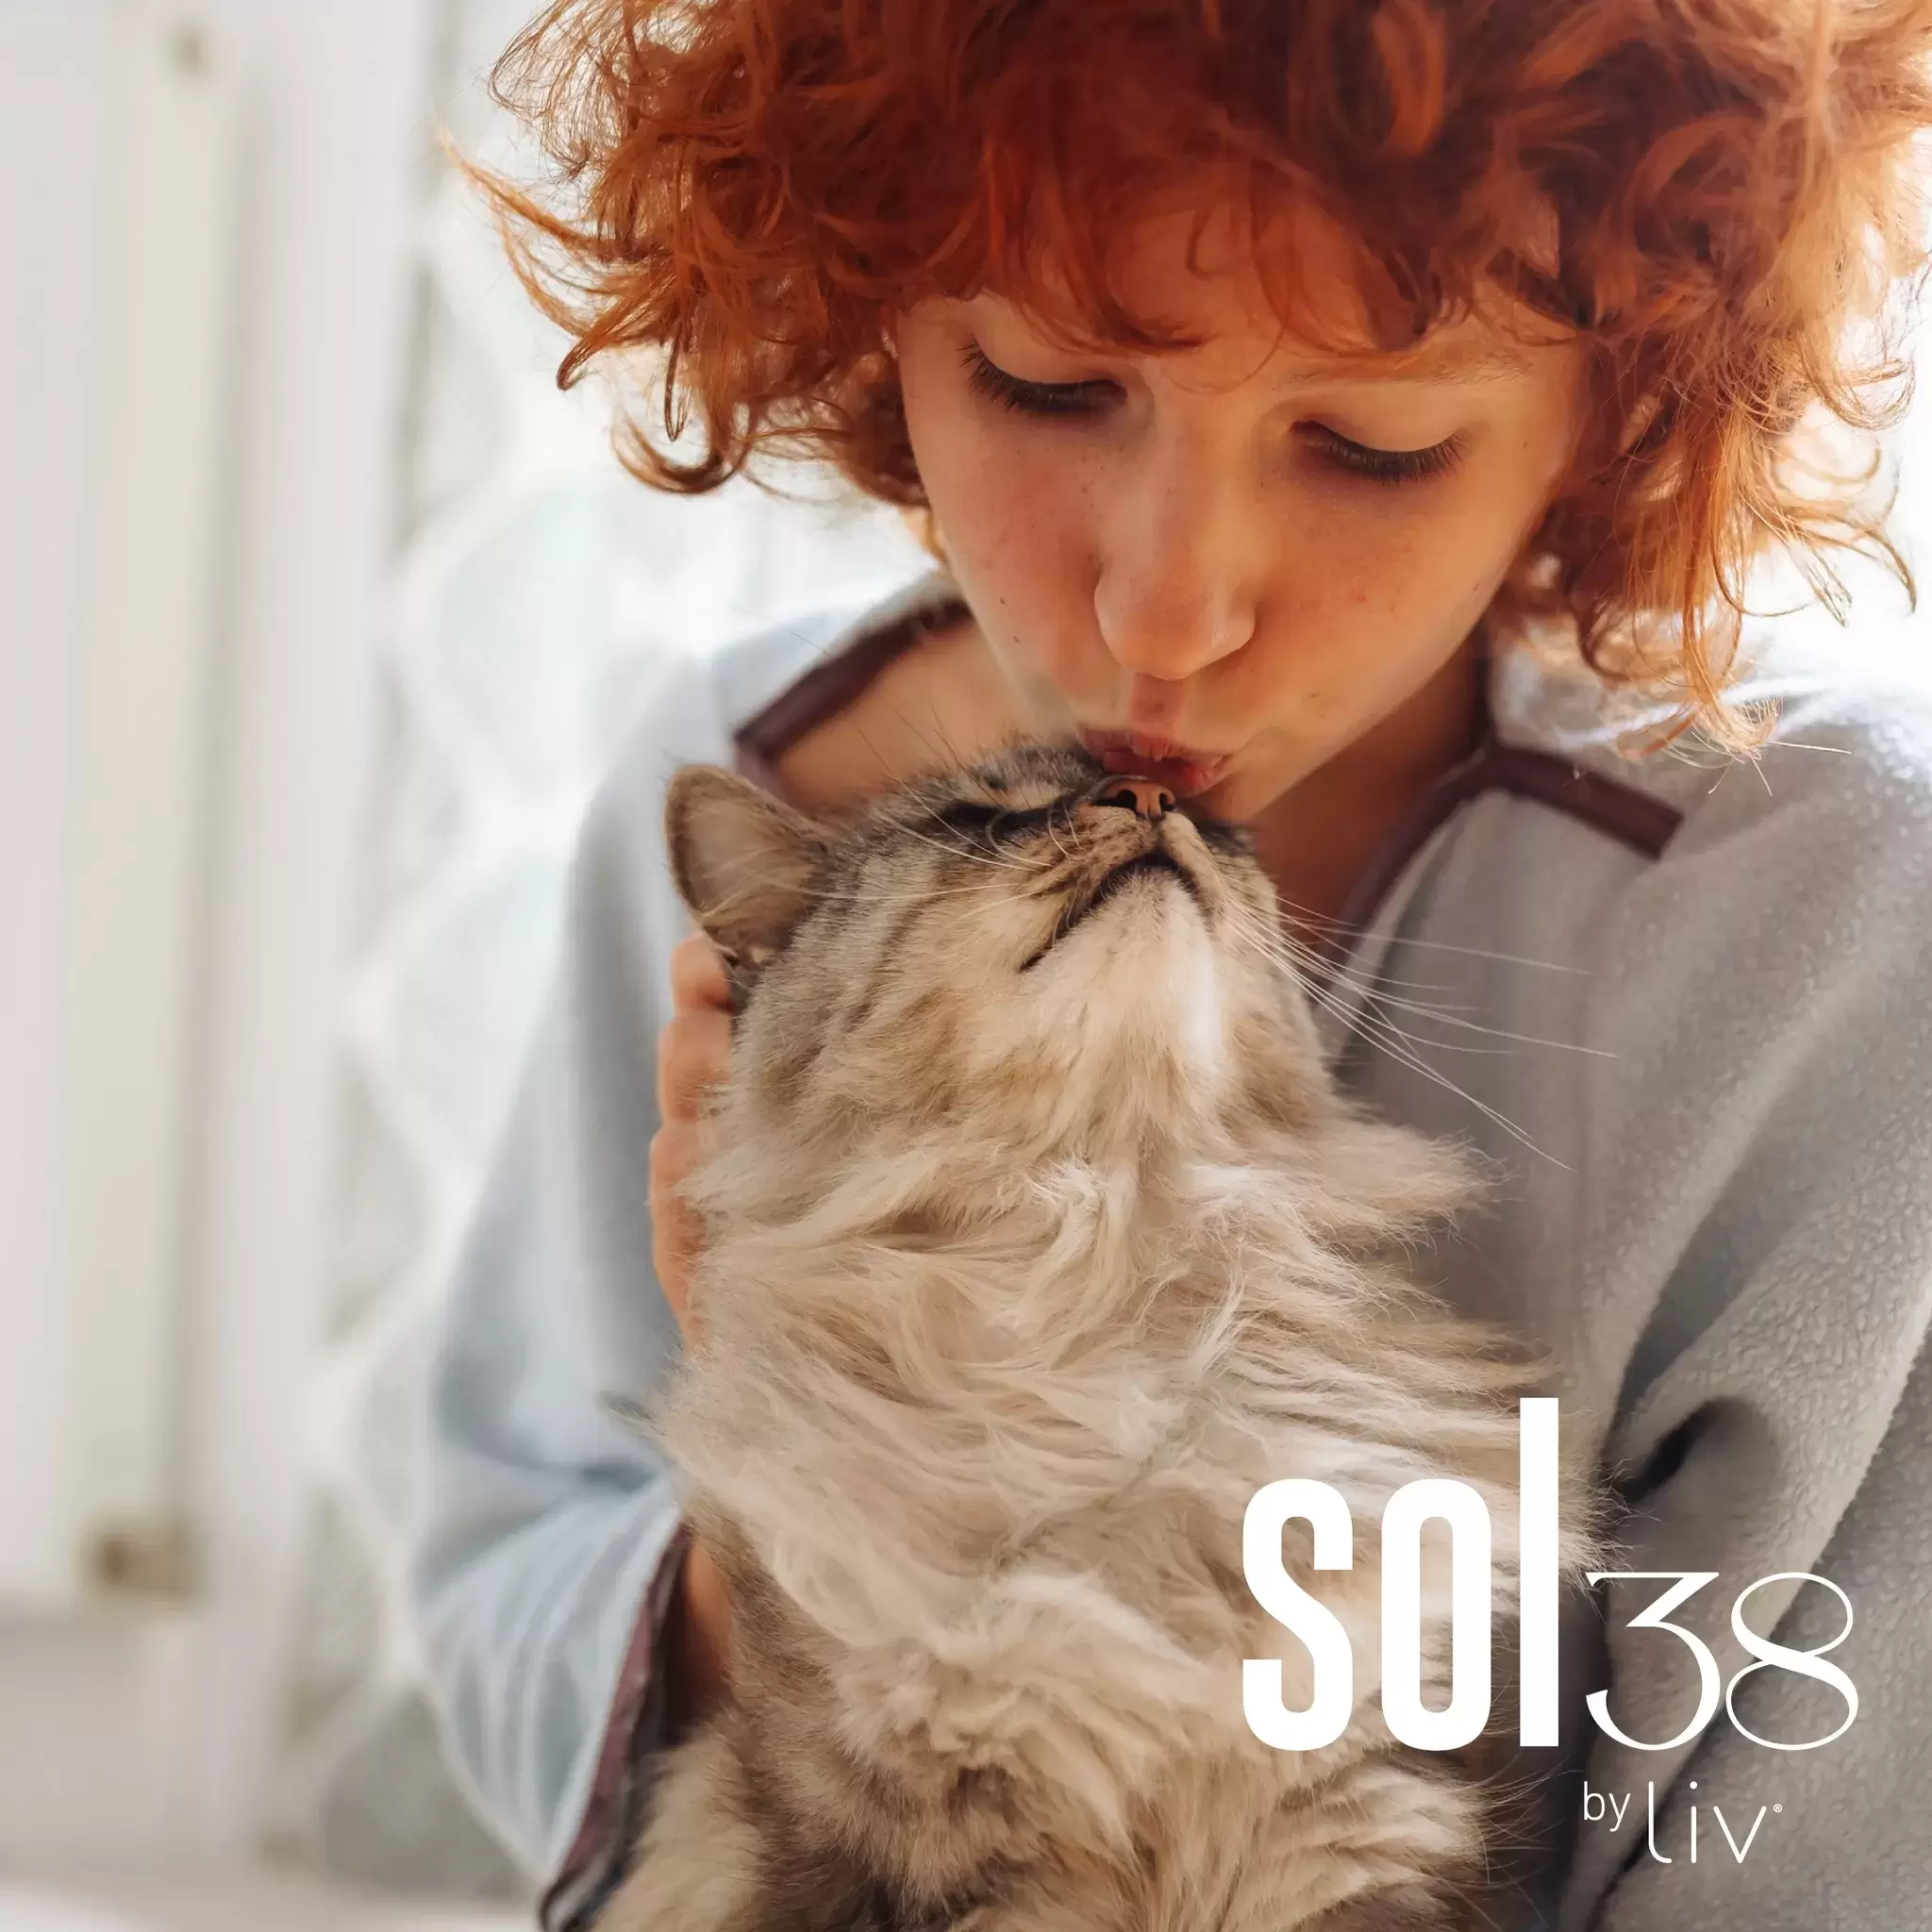 The best kind of roommates have four paws. 🐾

Our pet-friendly residences include plenty of warm, light-filled napping spots for your furry-friend. For more information and our move in special, please visit our website! ➡ www.sol38byliv.com